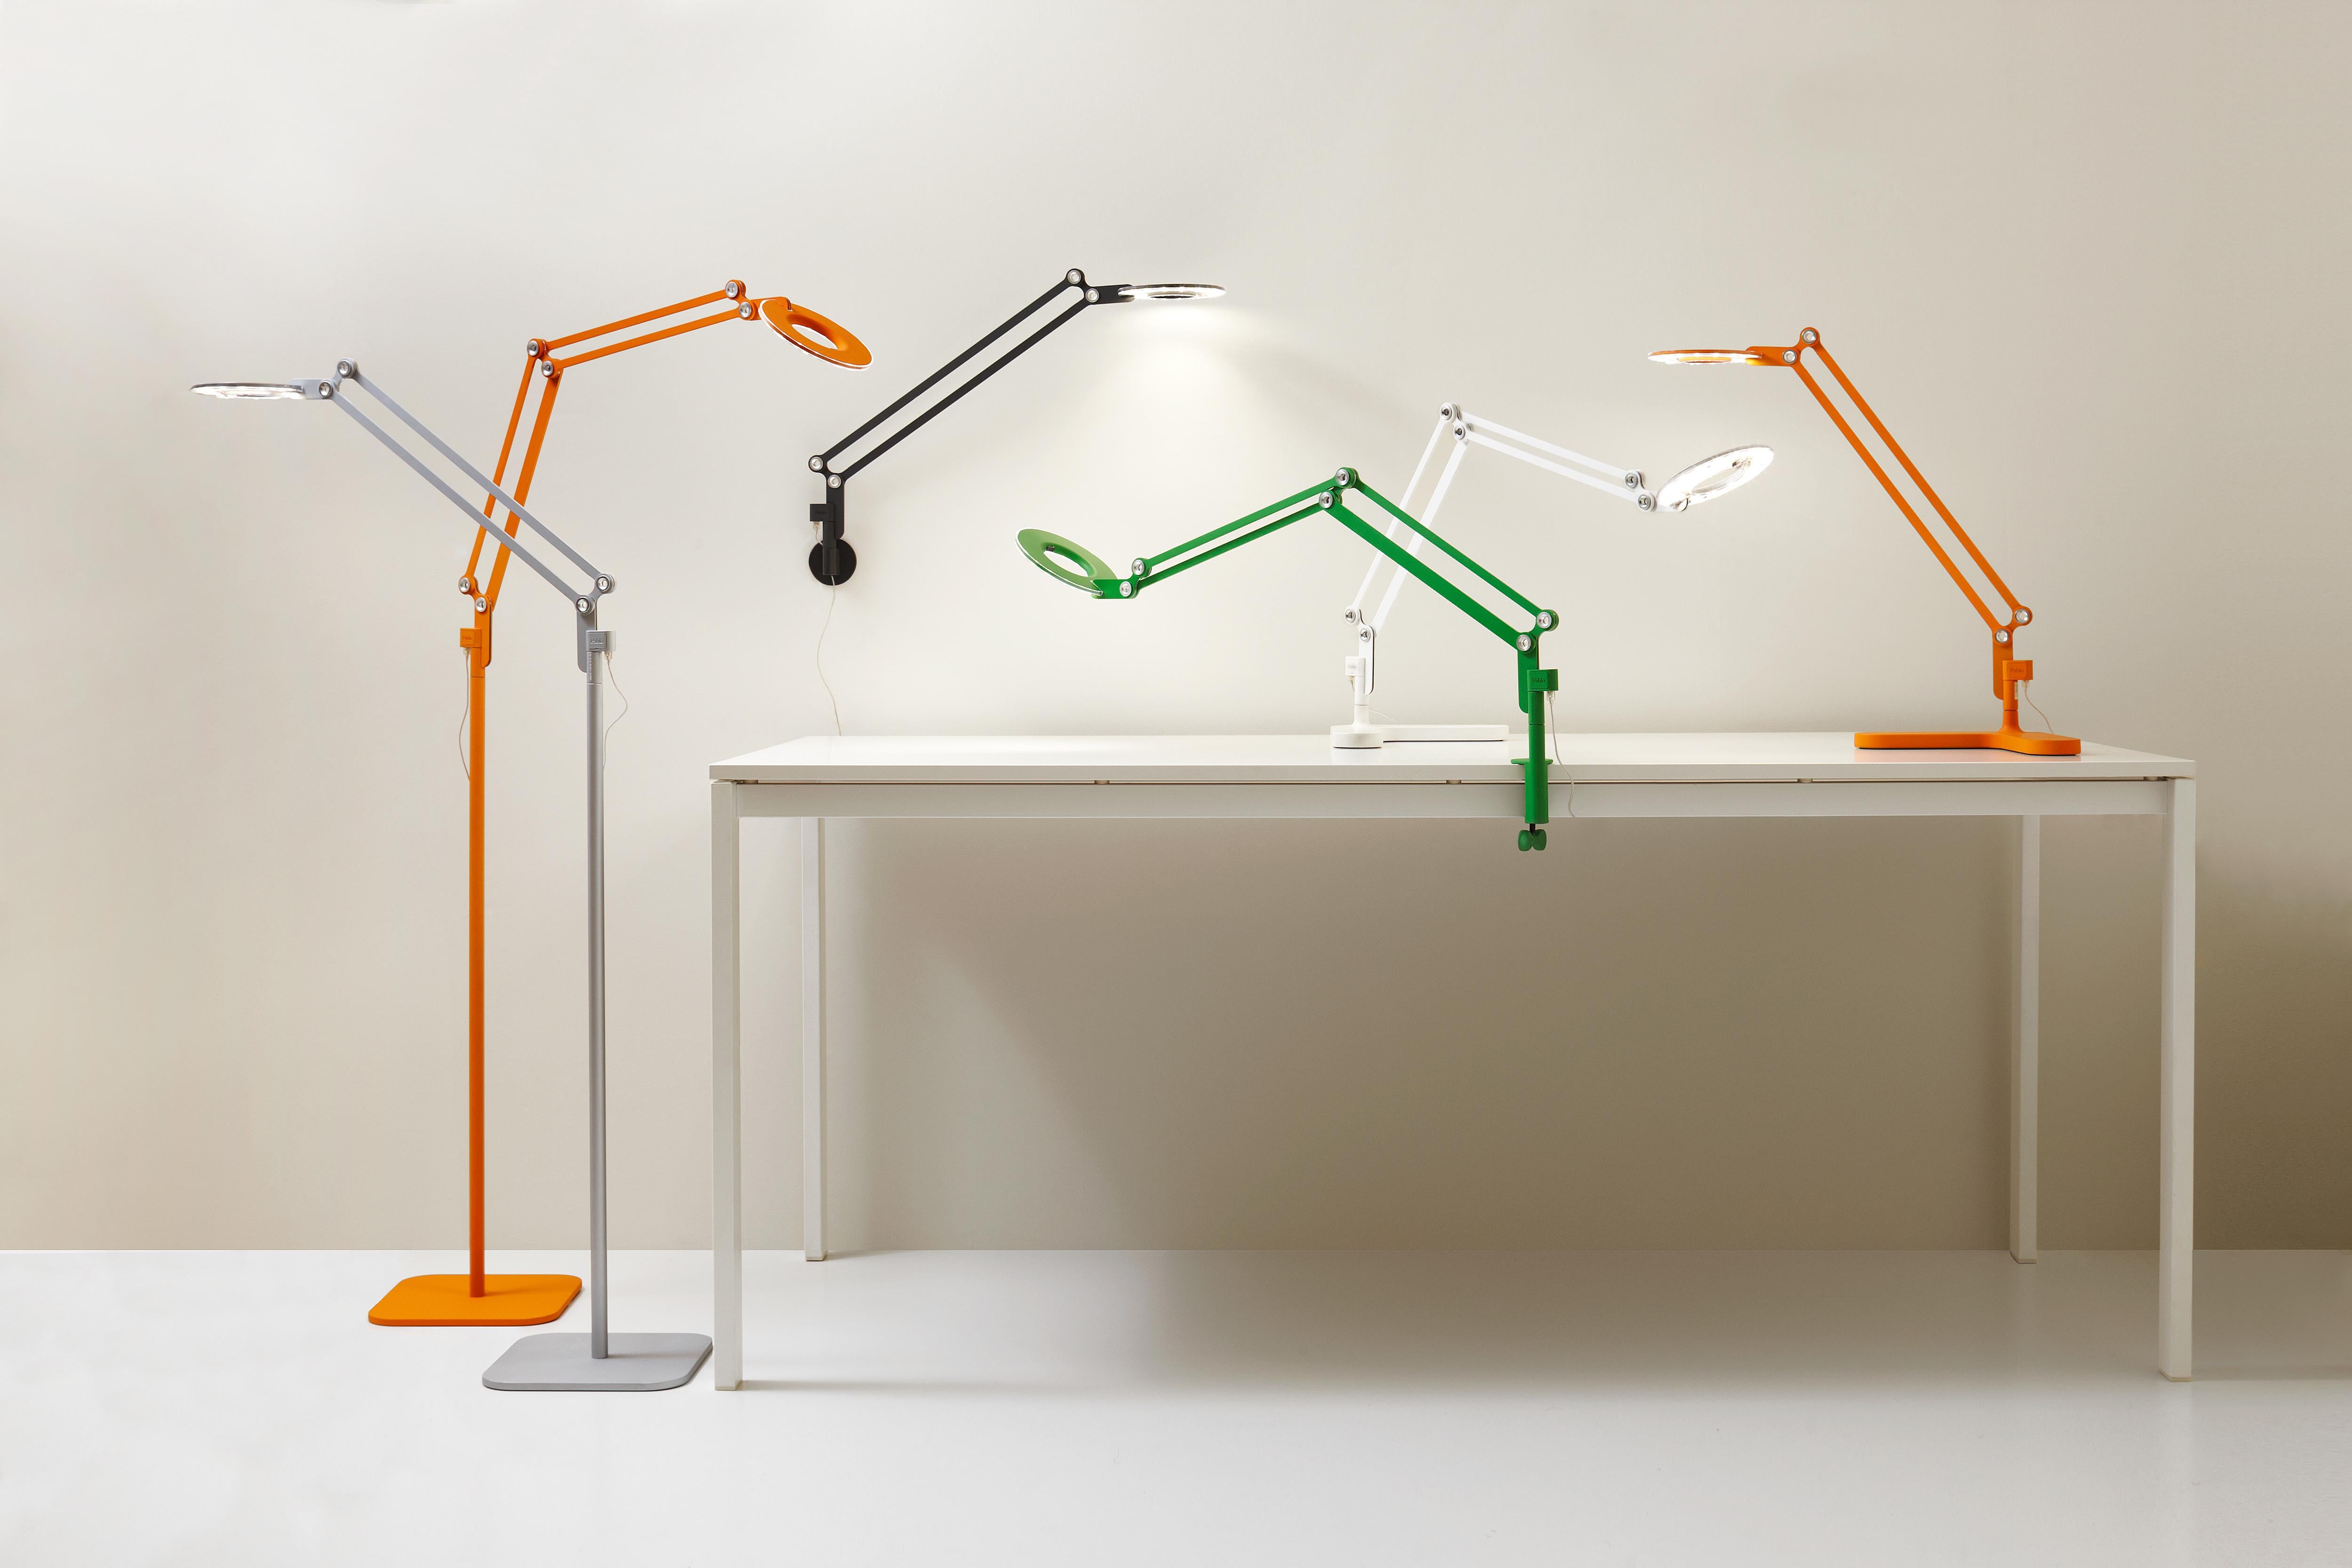 Link modernizes the classic pantograph task lamp, incorporating the most advanced LED lighting technology to date. Designed with a dual-purpose shade/handle, Link seamlessly balances performance and style to satisfy focused lighting needs in any